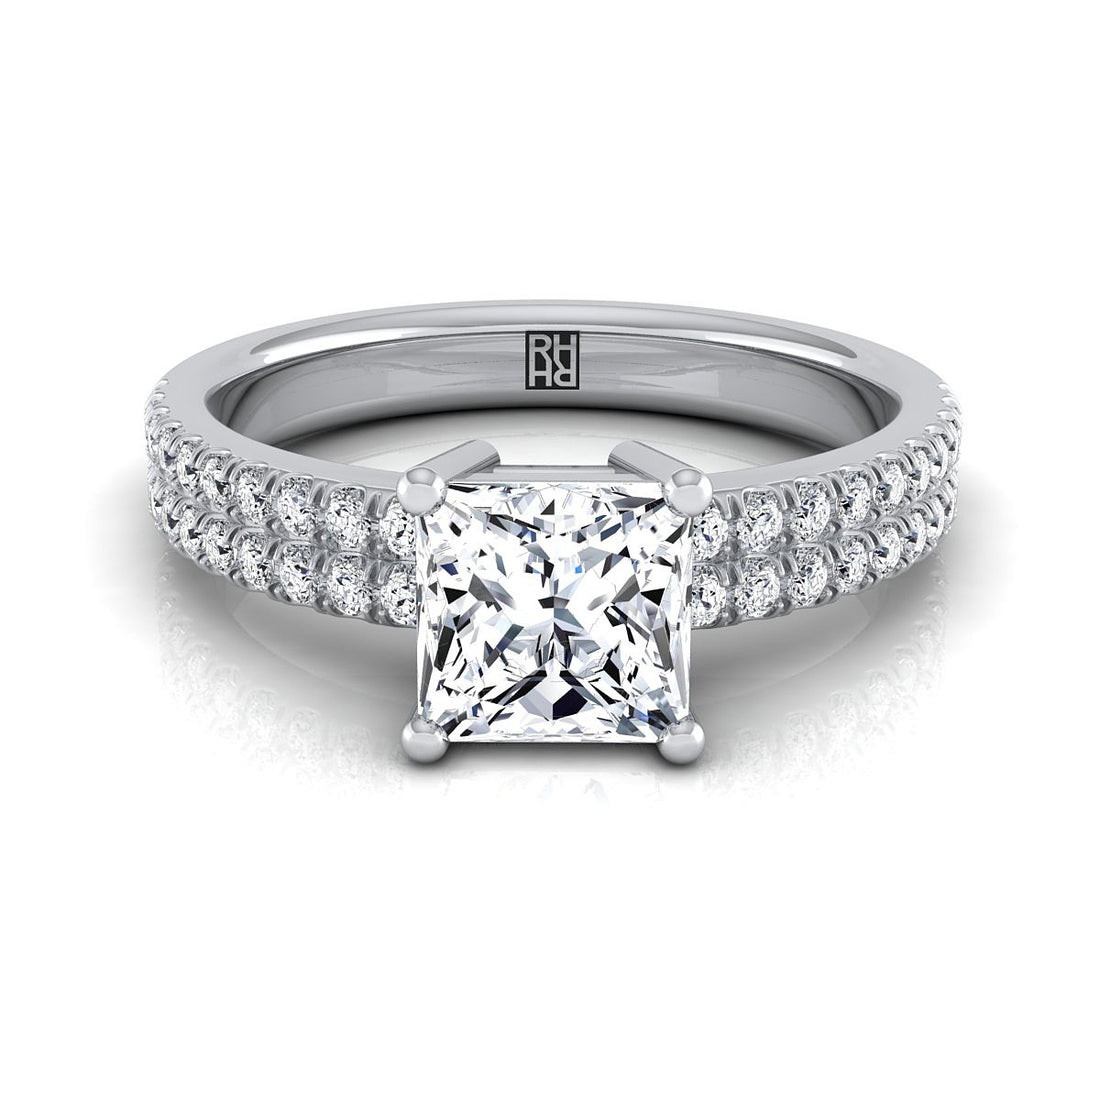 Aspects to Consider When Choosing a Pave Diamond Ring Band